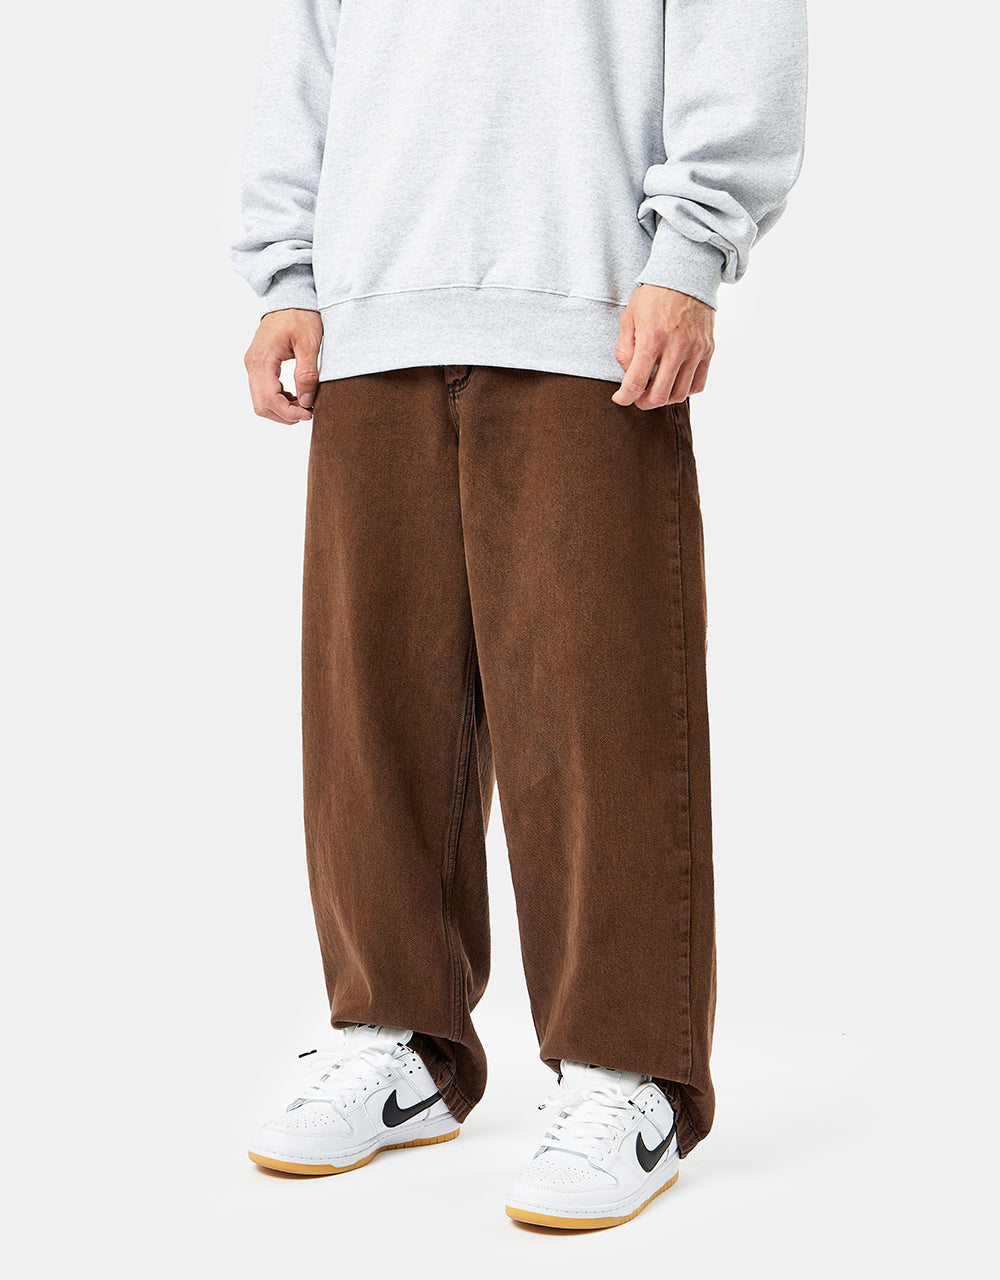 Route One Super Baggy Denim Jeans - Gingerbread